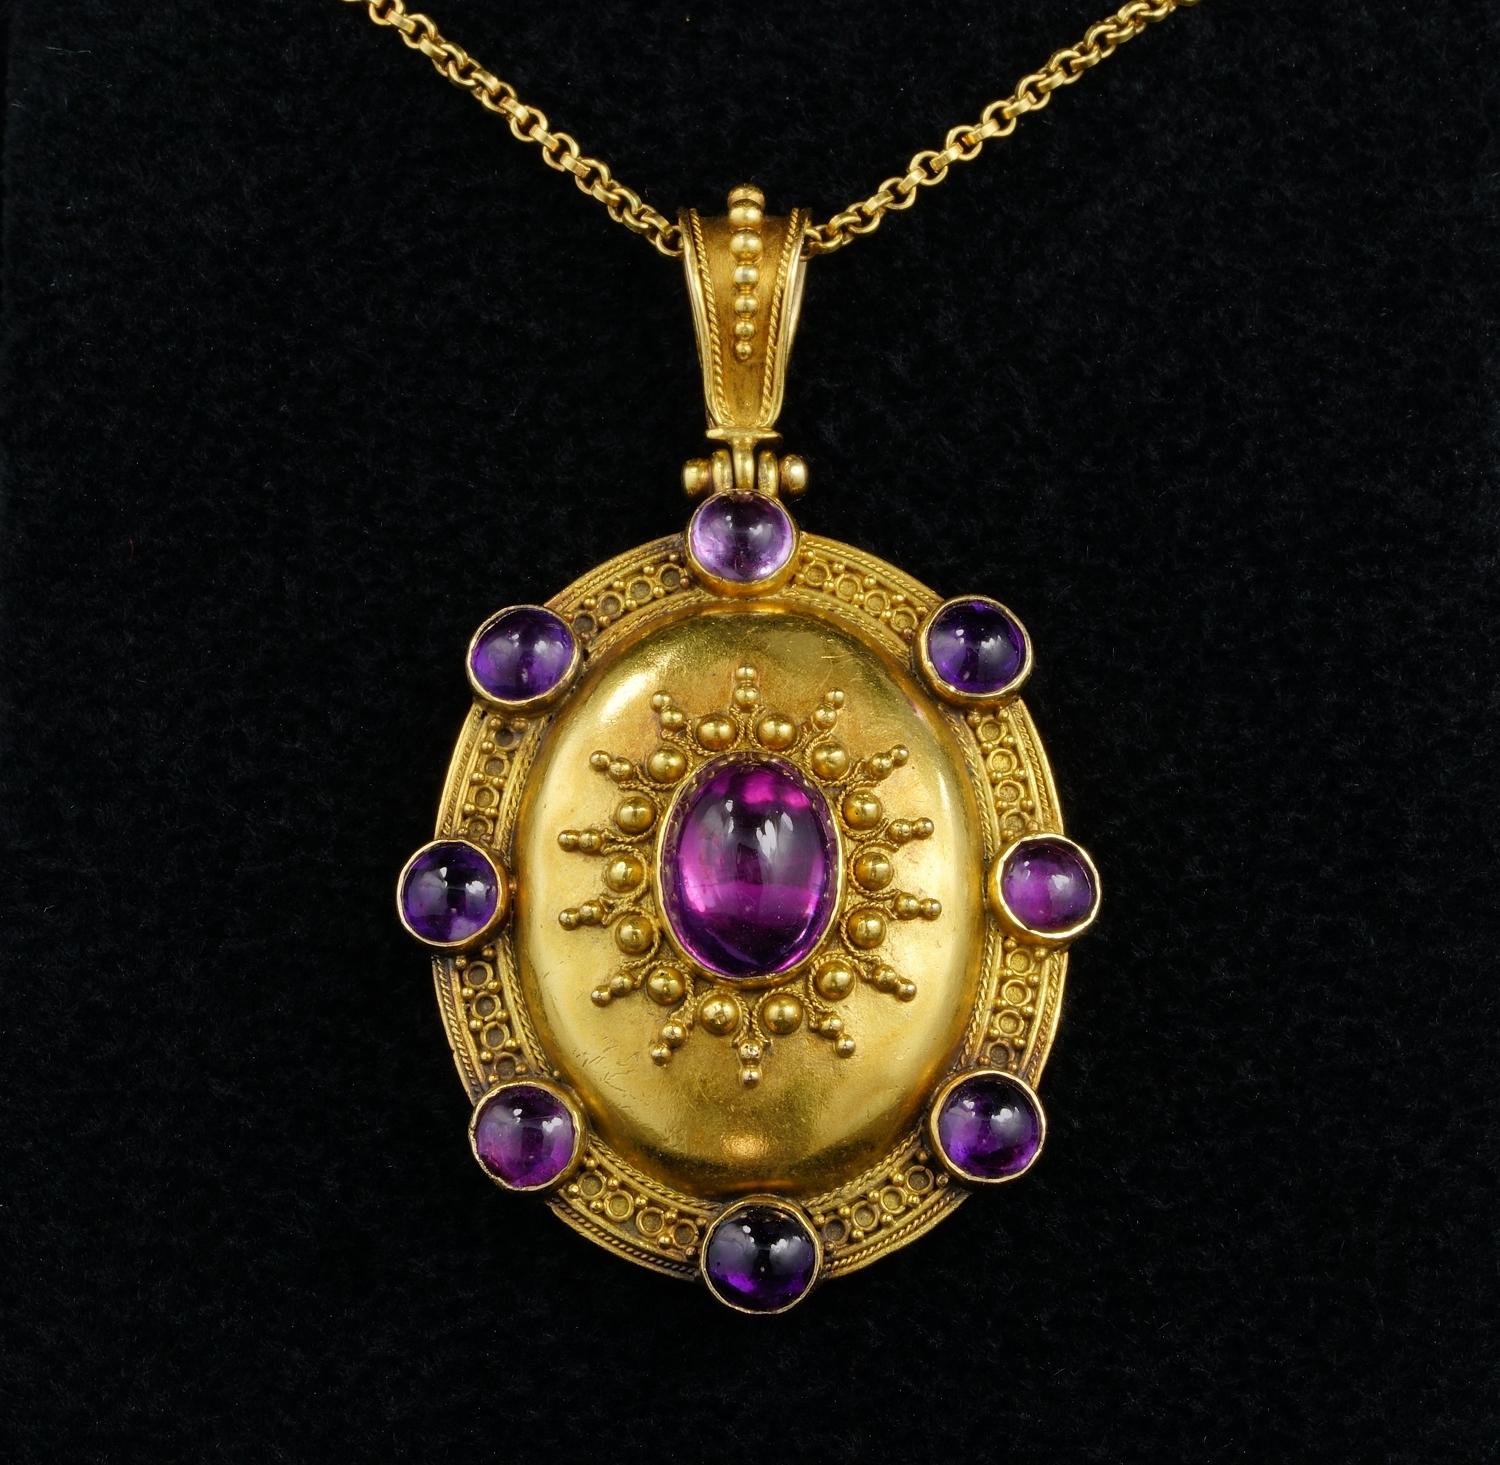 Precious Art

Magnificent large locket from the Victorian period, artfully crafted by Carlo Giuliano
One of the leading jewellery masters during the Victorian period, rewarded by Queen Victoria for his distinction for enamelling and granulation